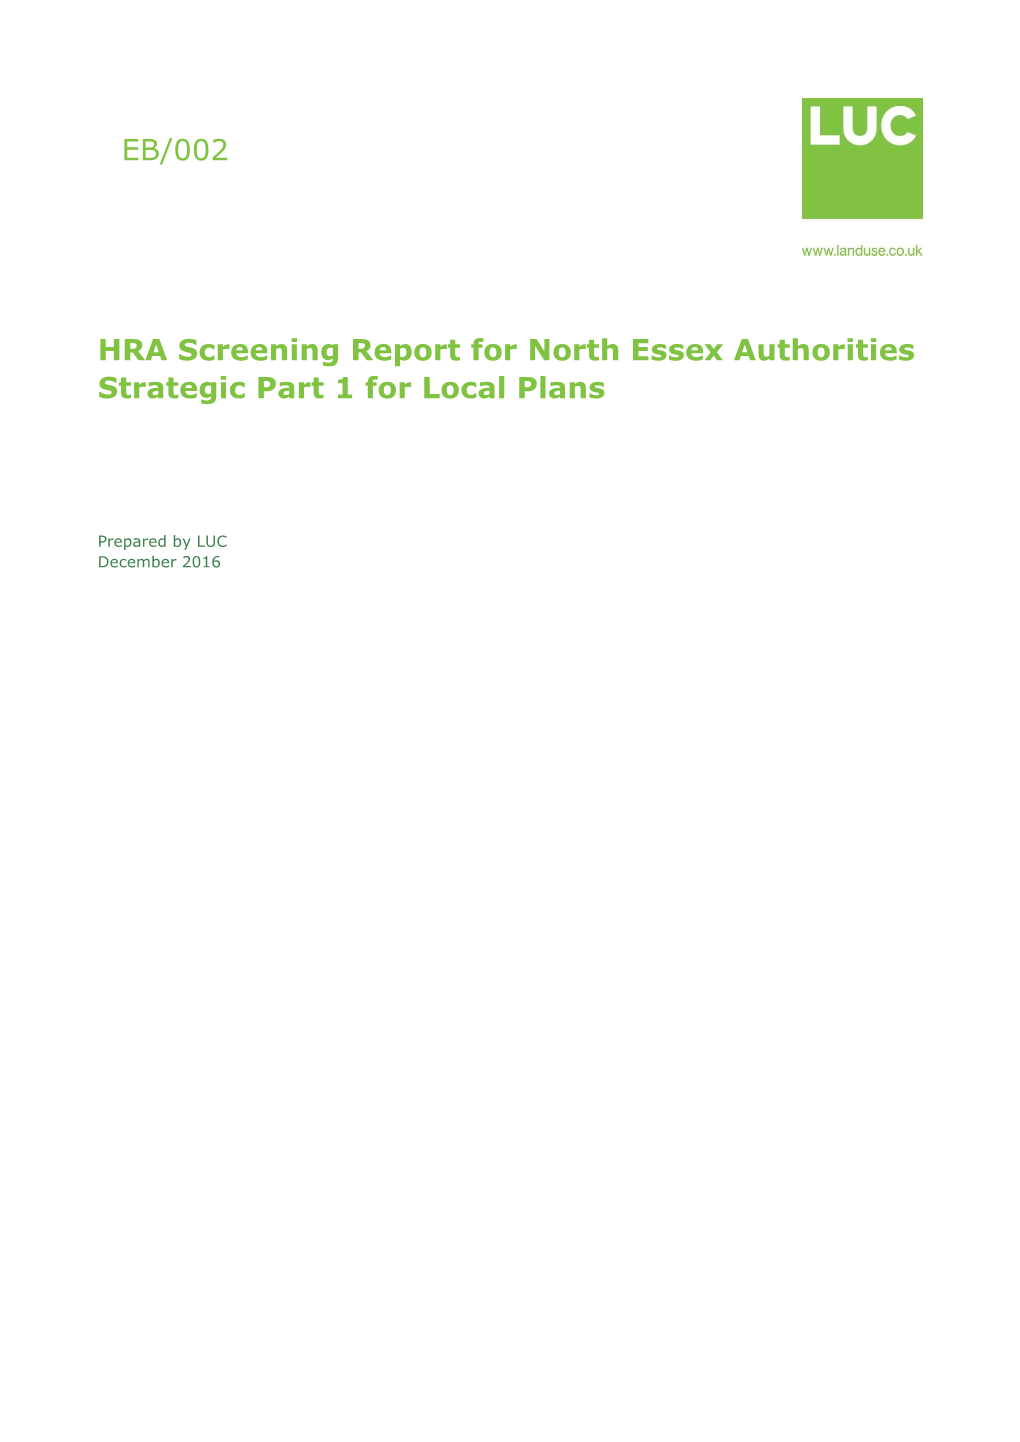 HRA Screening Report for North Essex Authorities Strategic Part 1 for Local Plans